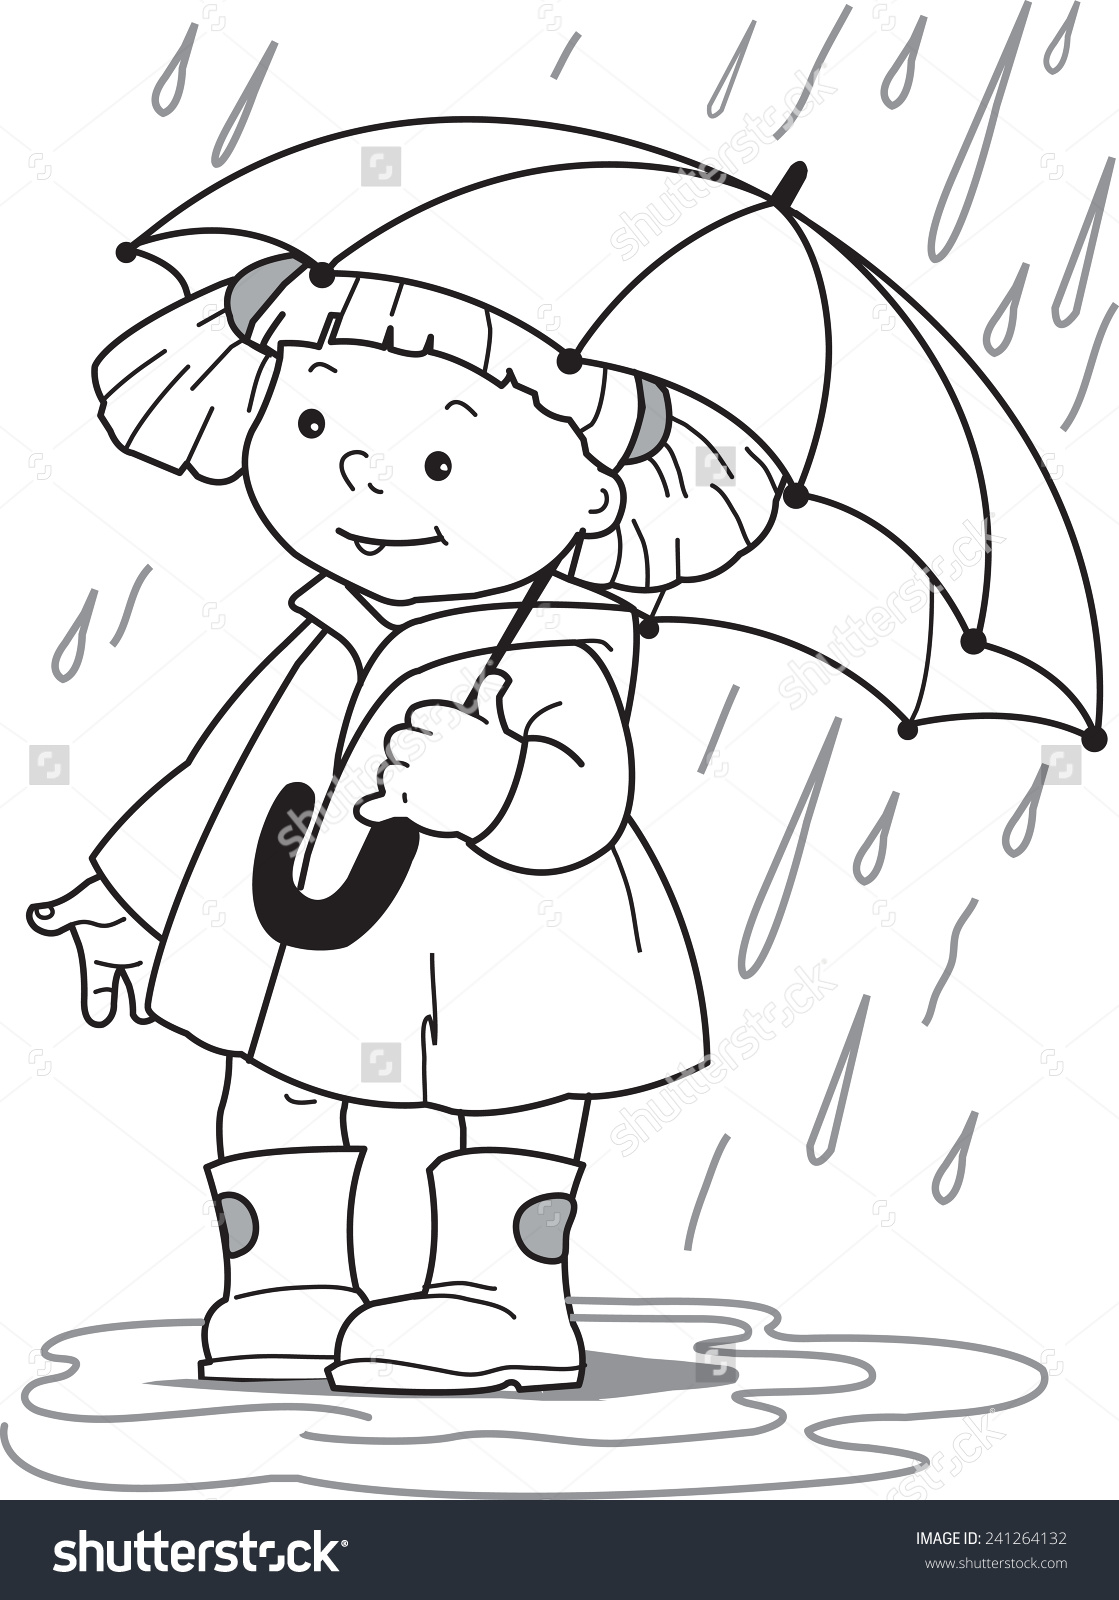 Image result for cartoon child wearing raincoat black and white